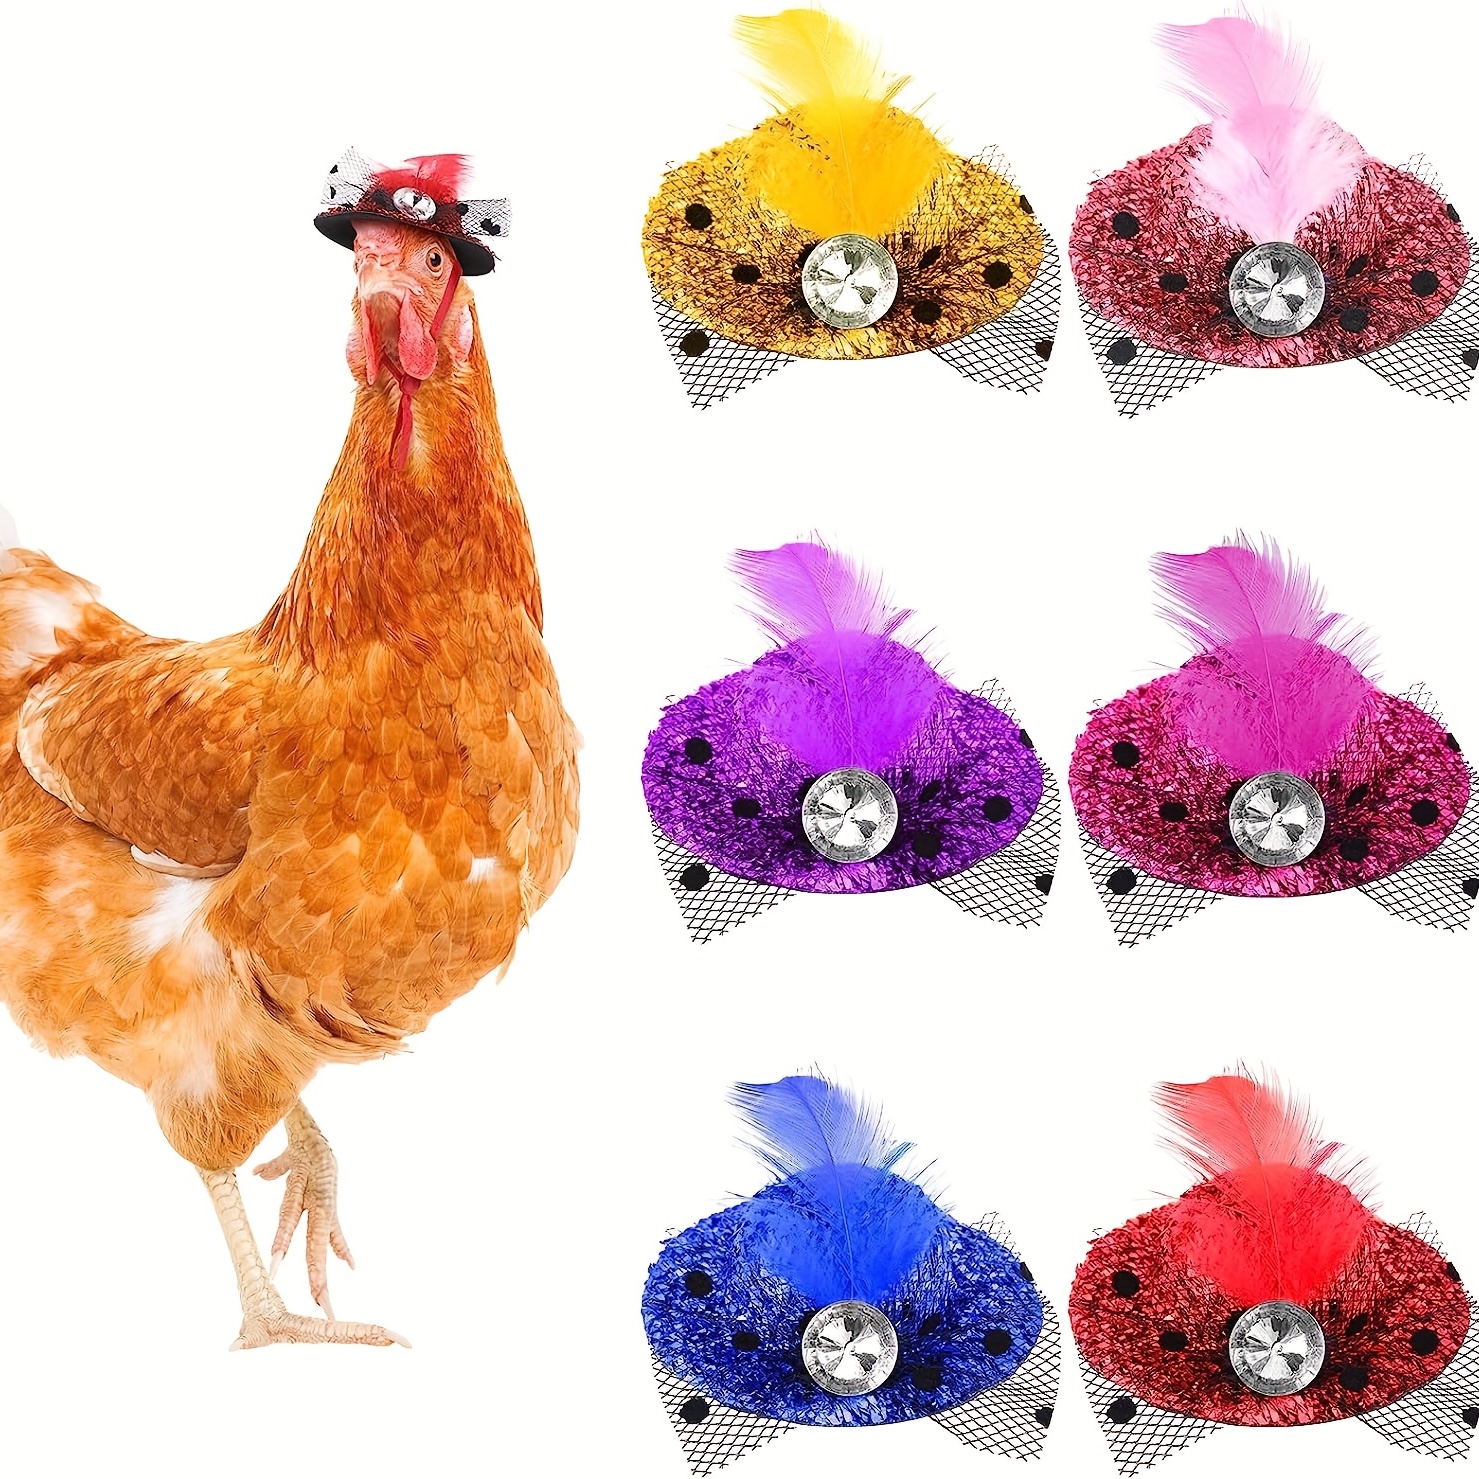 2pcs/set Adjustable Chicken Arms Toys for Costume Cosplay and Decorations -  Strong and Funny Artificial Arms for Chickens, Roosters, and Hens